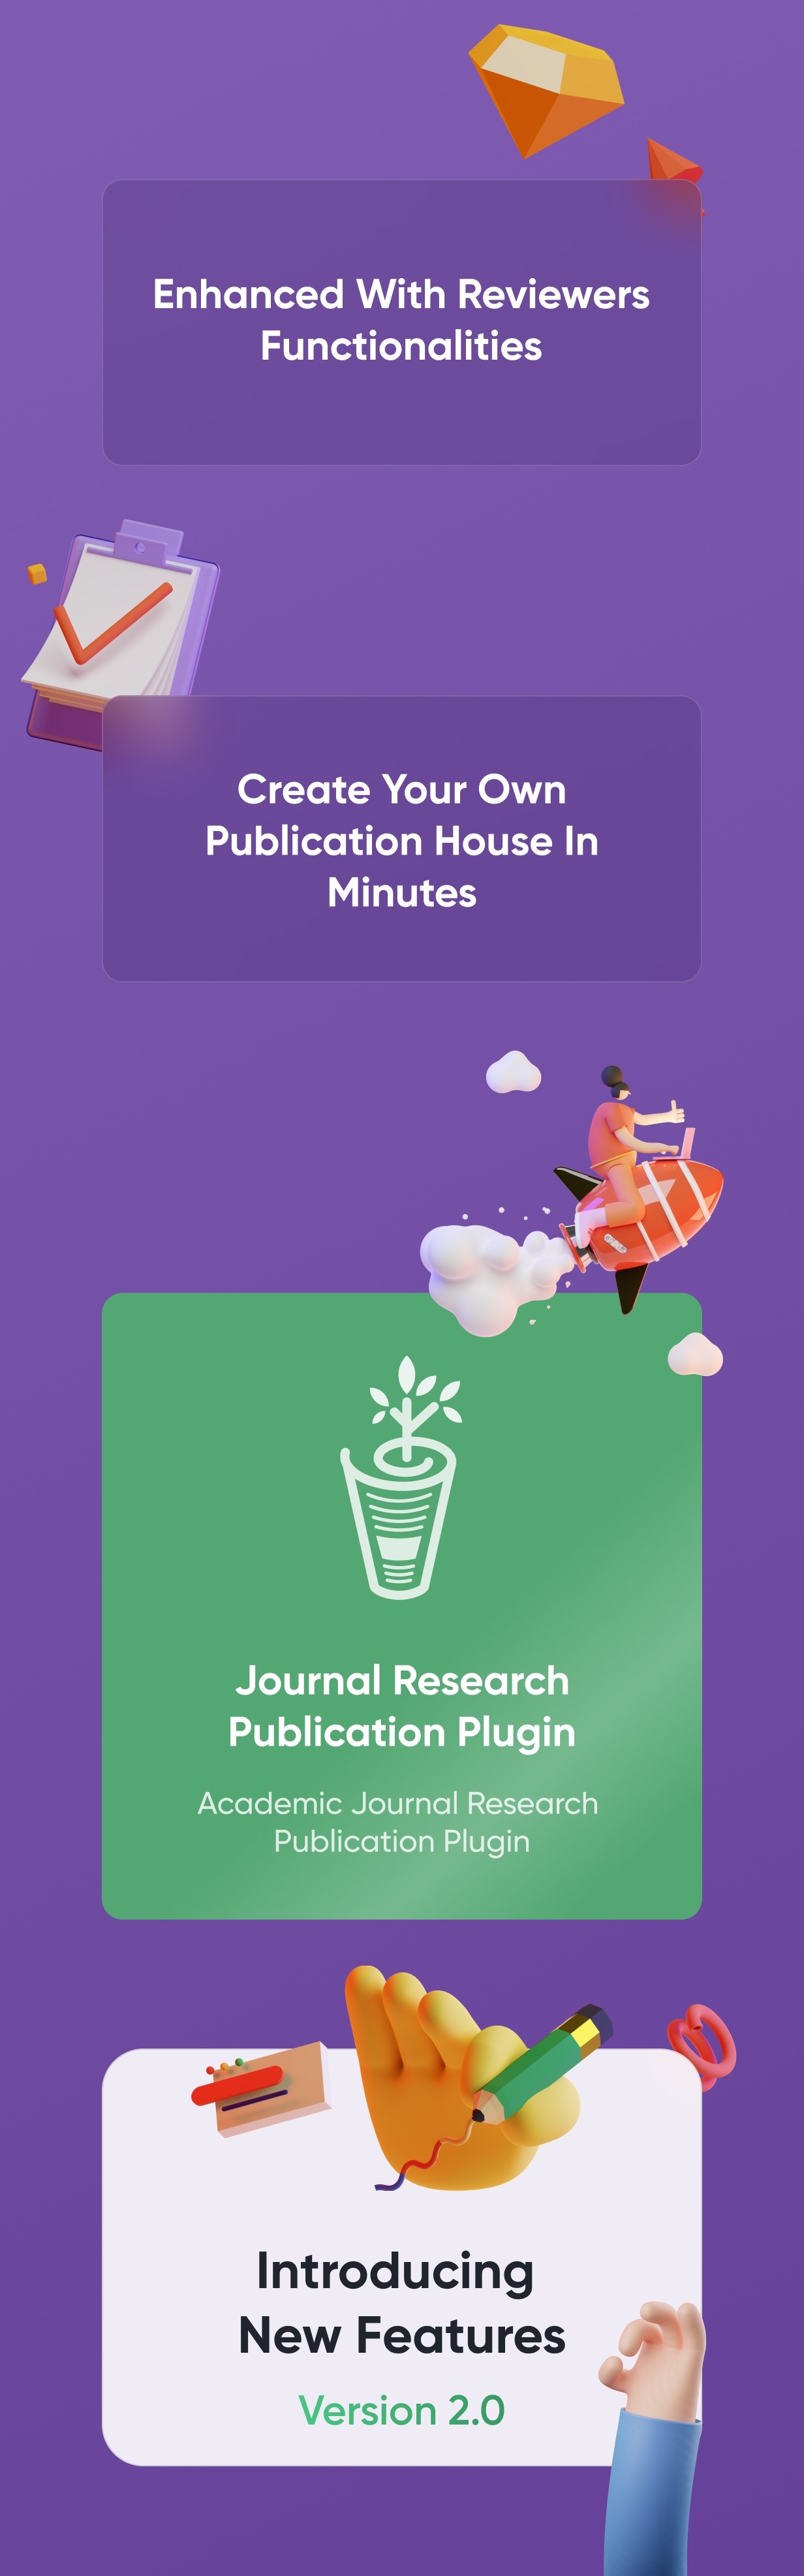 About Journal Research Publication Plugin